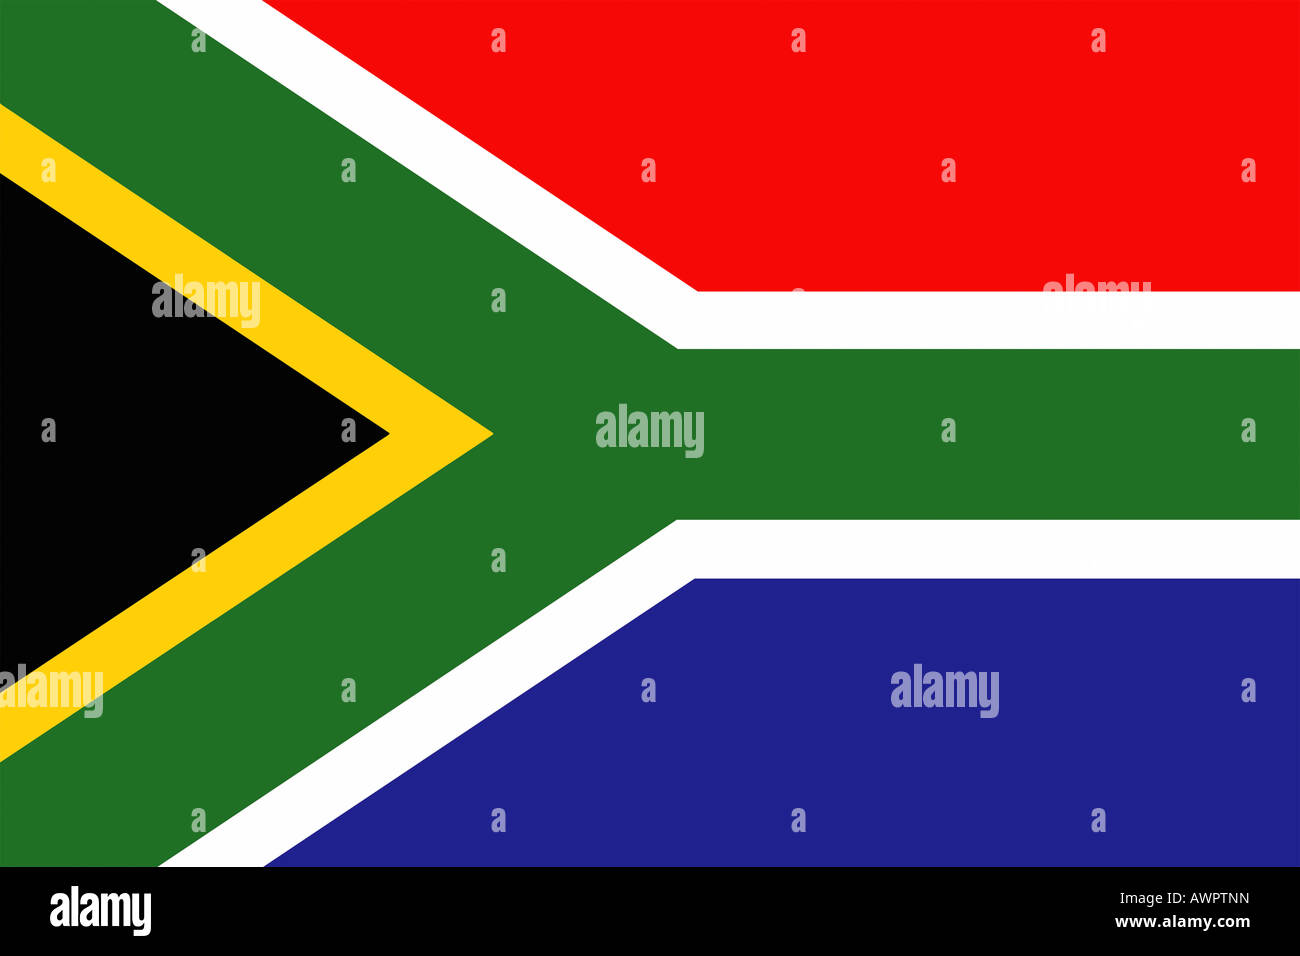 The flag of South Africa - graphic Stock Photo